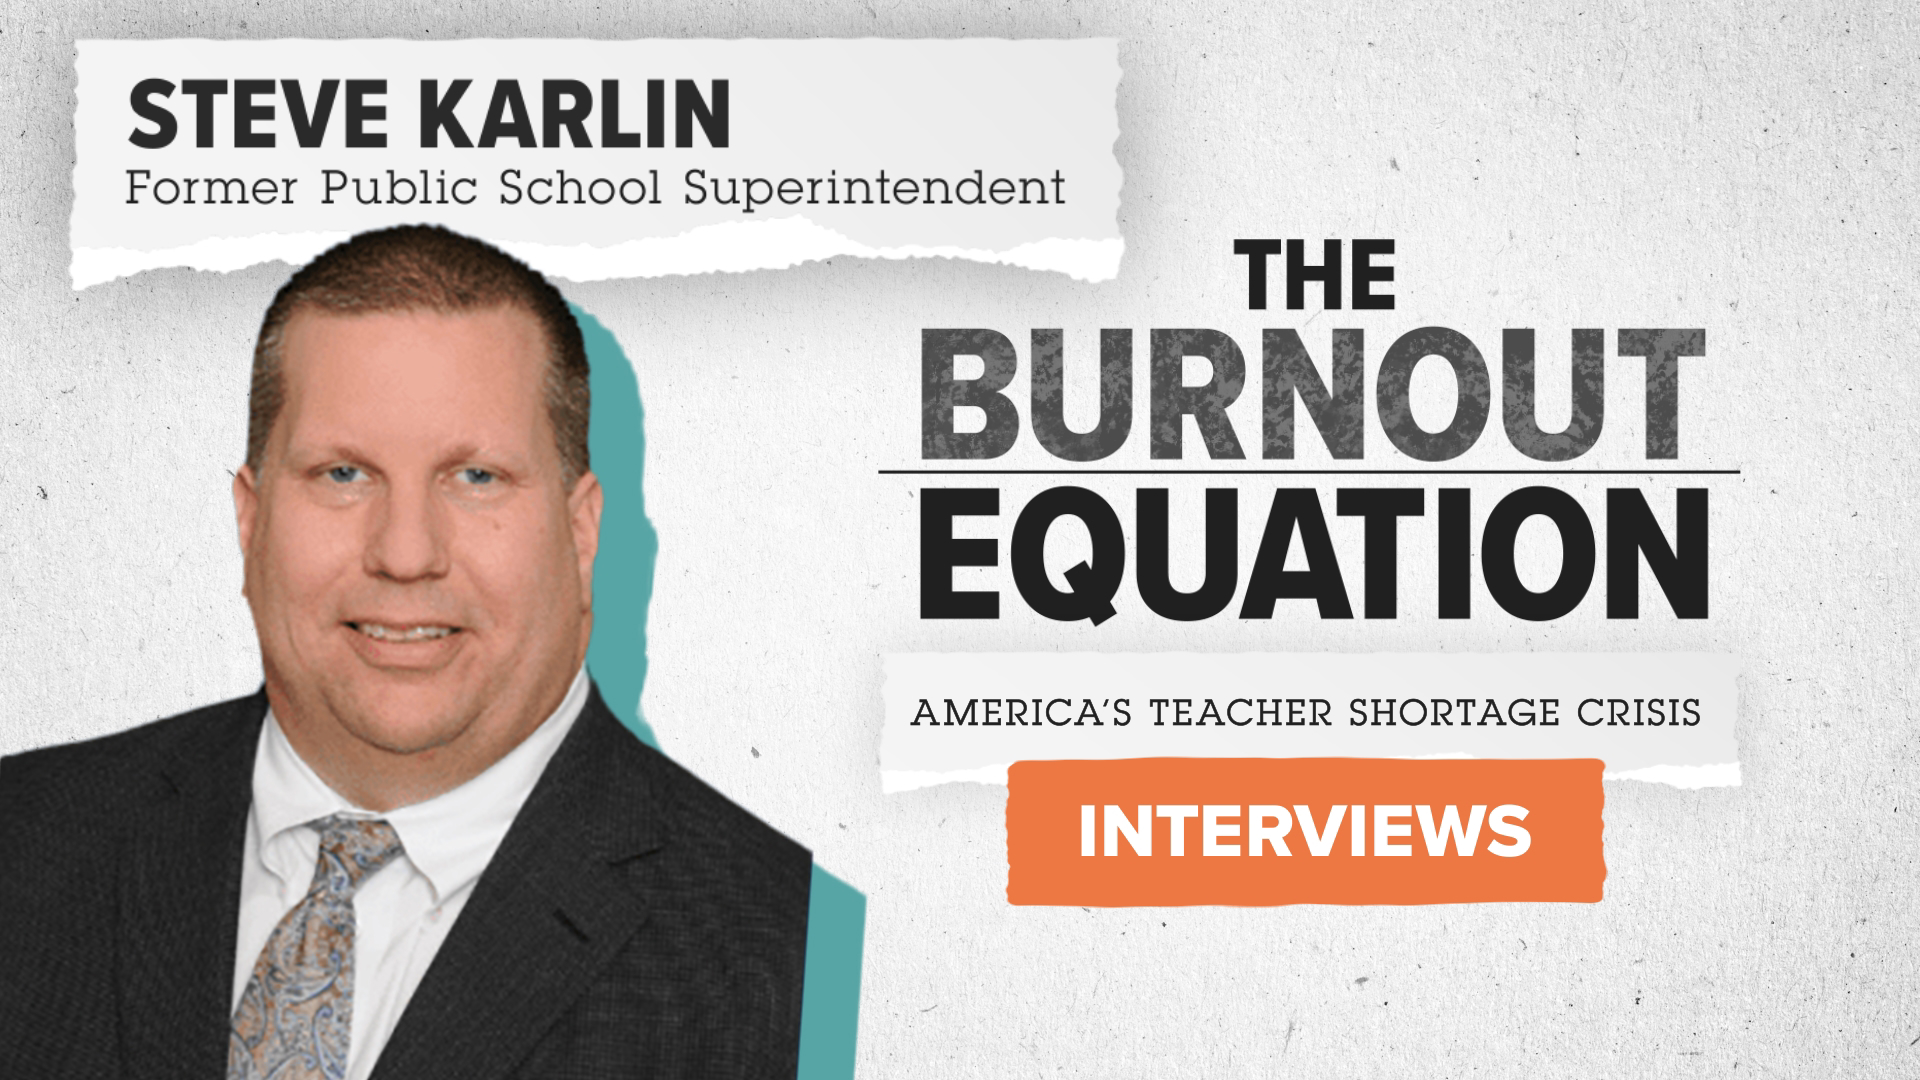 Former superintendent for Garden City Public Schools Steve Karlin talks about what strategies he implemented to combat the teacher shortage crisis.